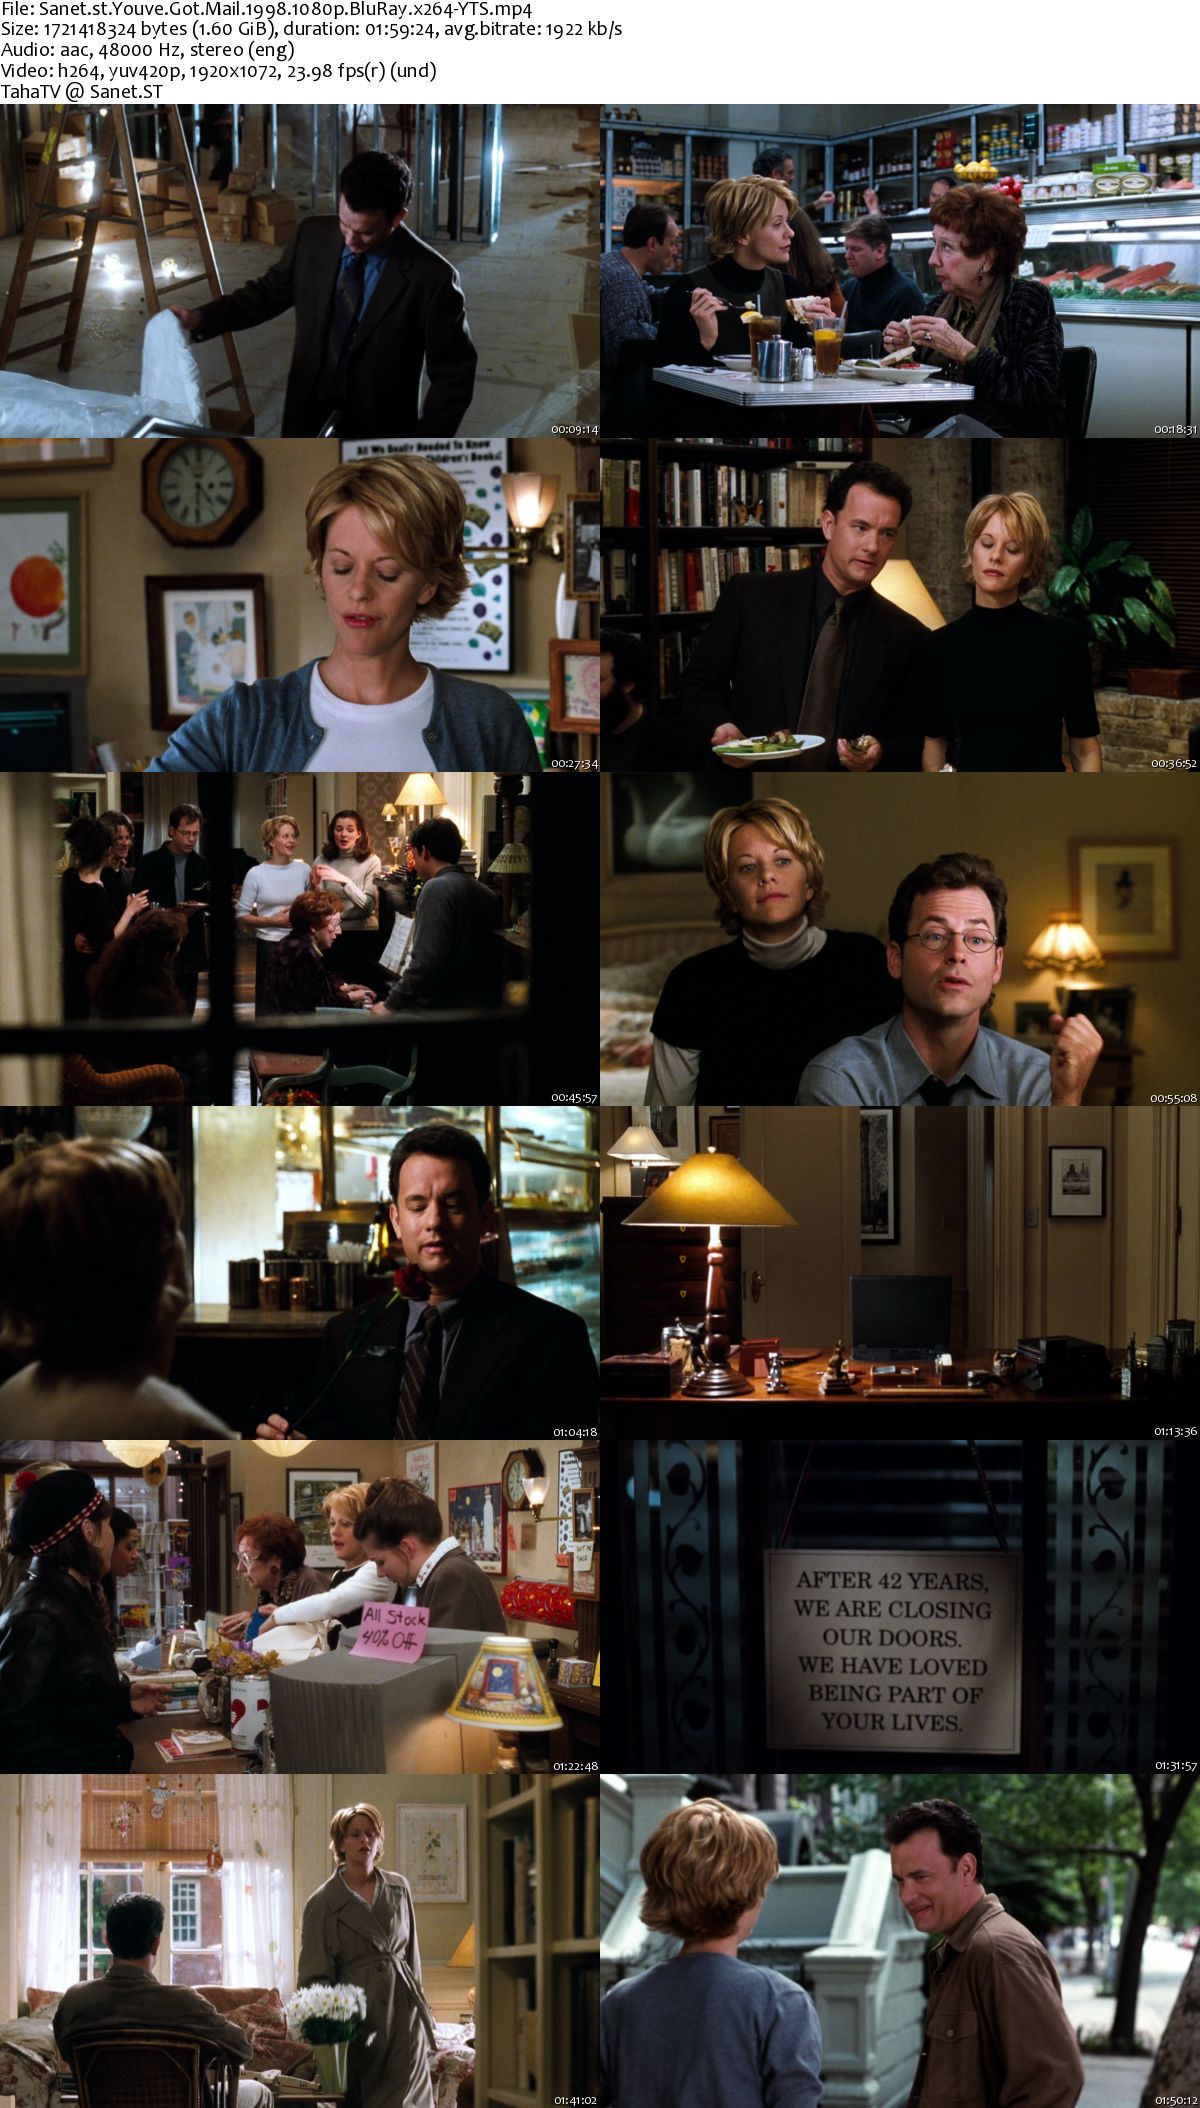 Download Youve Got Mail 1998 1080p BluRay x264 YTS SoftArchive